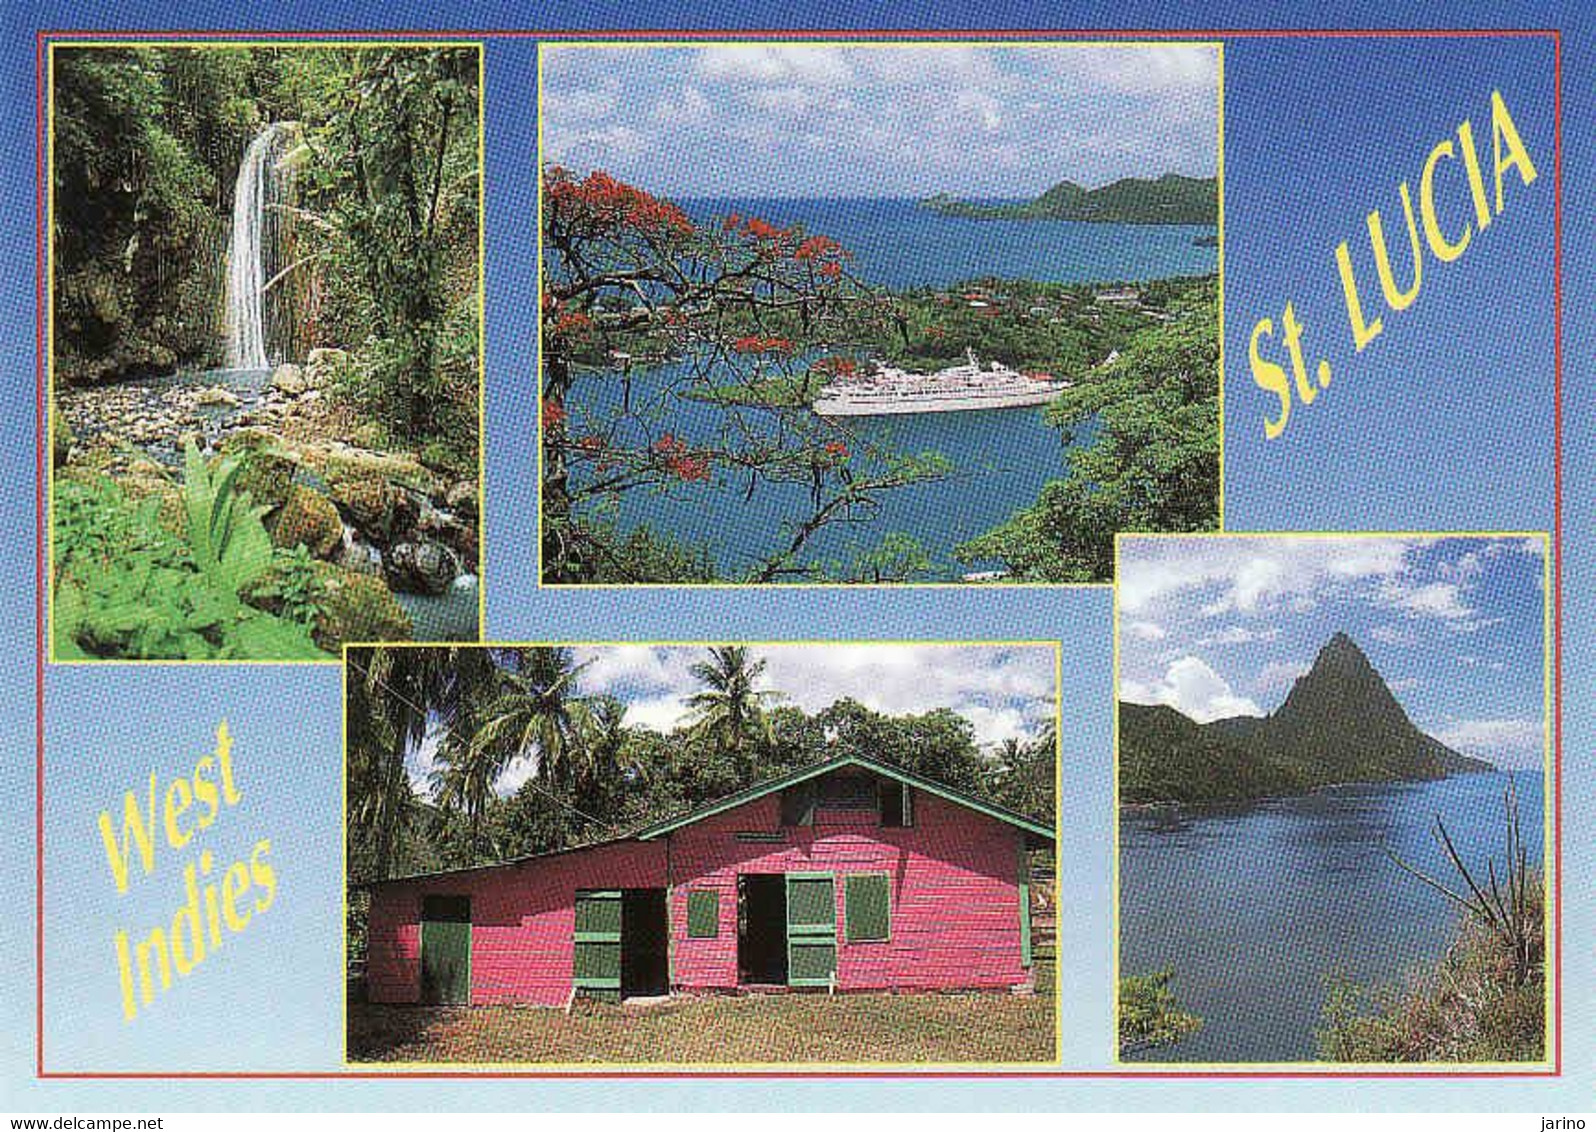 Saint Lucia, Different Views Of The Island, Used - Sainte-Lucie